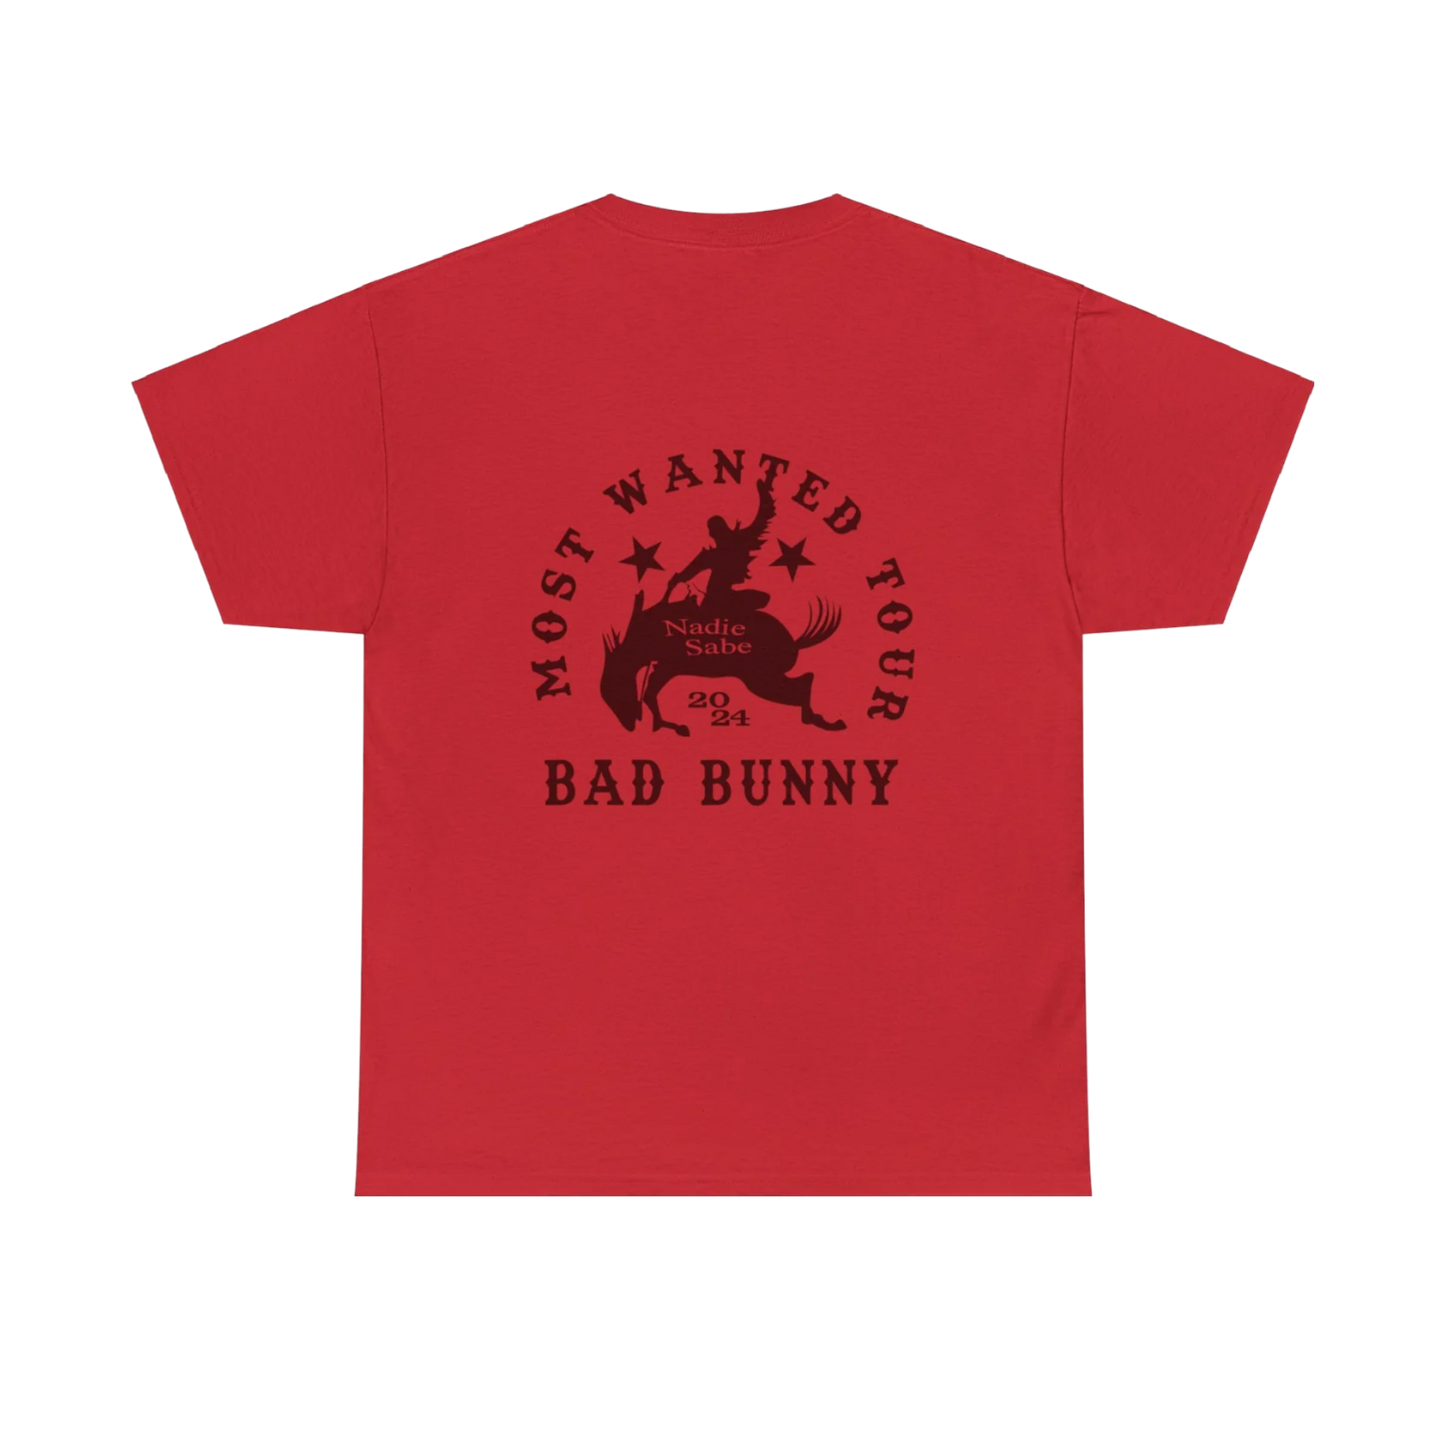 MOST WANTED TOUR - NADIE SABE MOST WANTED HORSE COTTON TEE